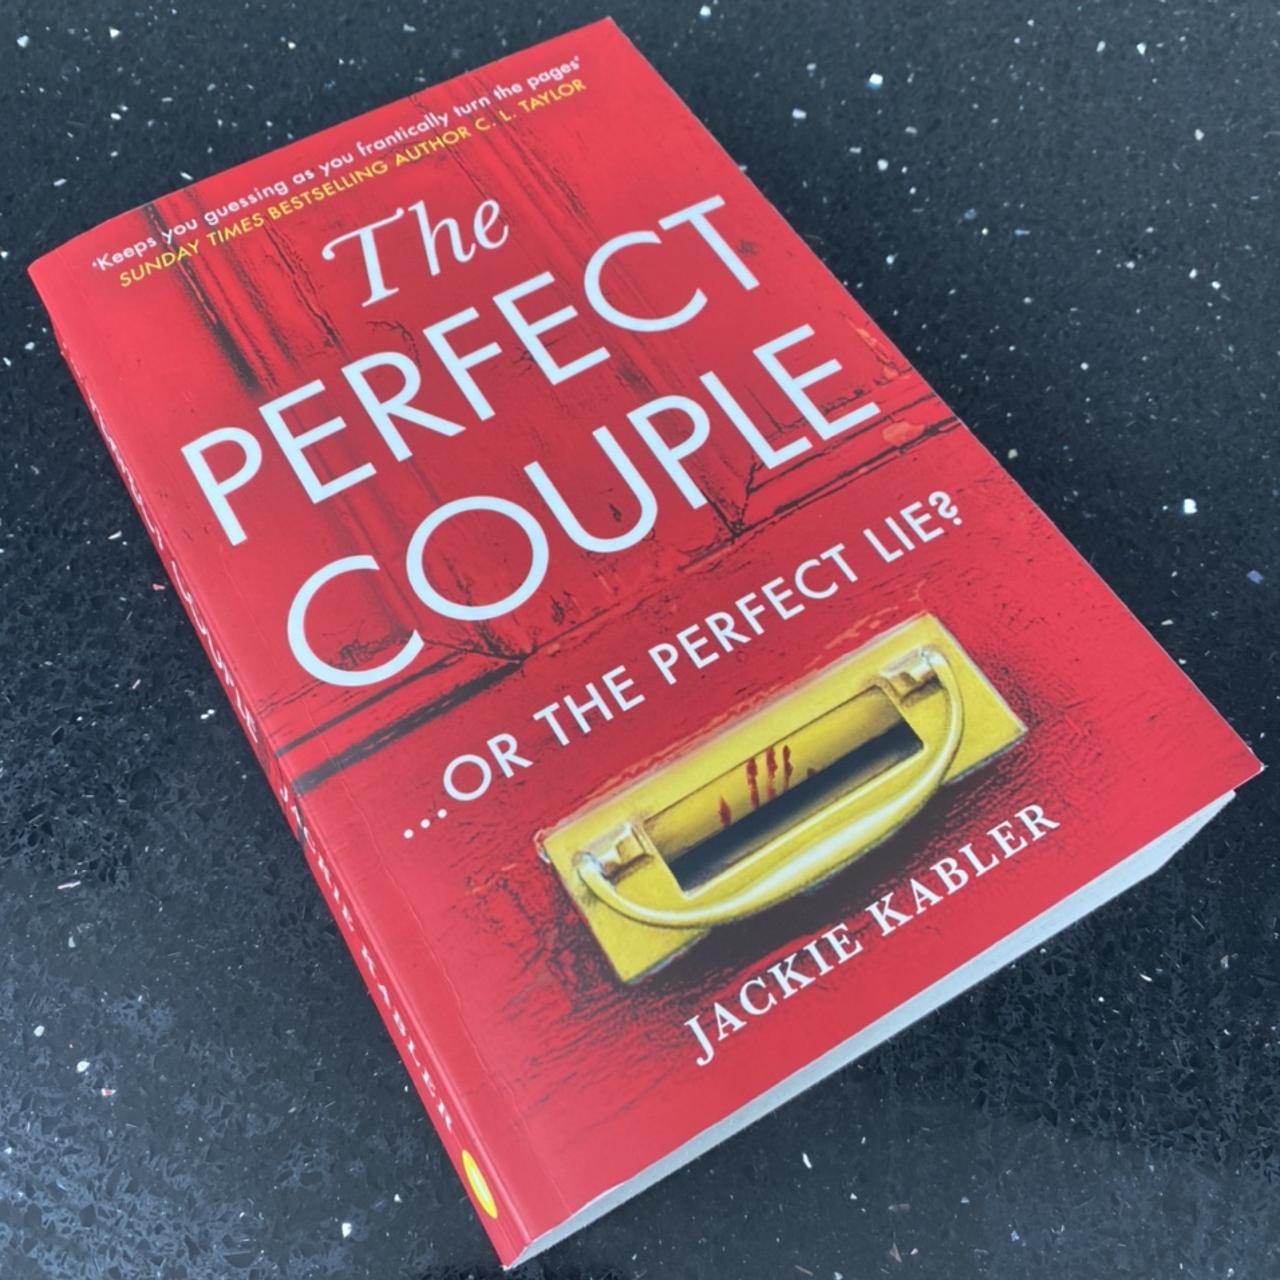 The Perfect Couple by Jackie Kabler book review